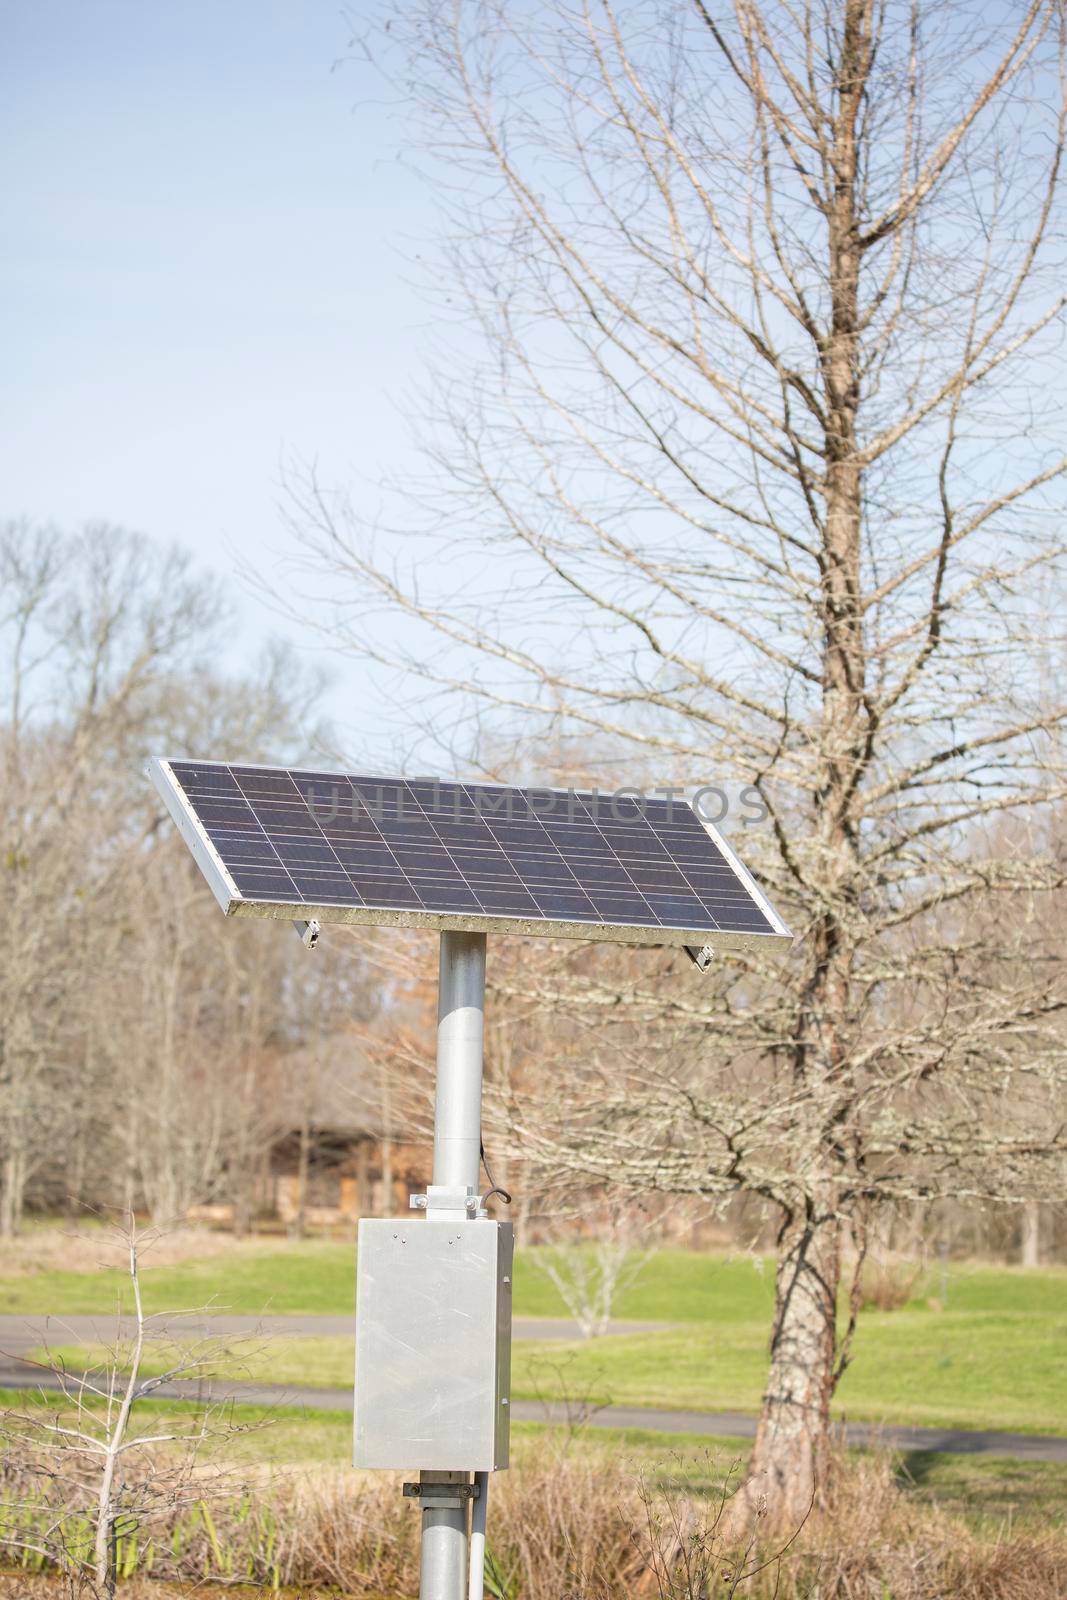 Solar panel energy source in a clearing outdoors